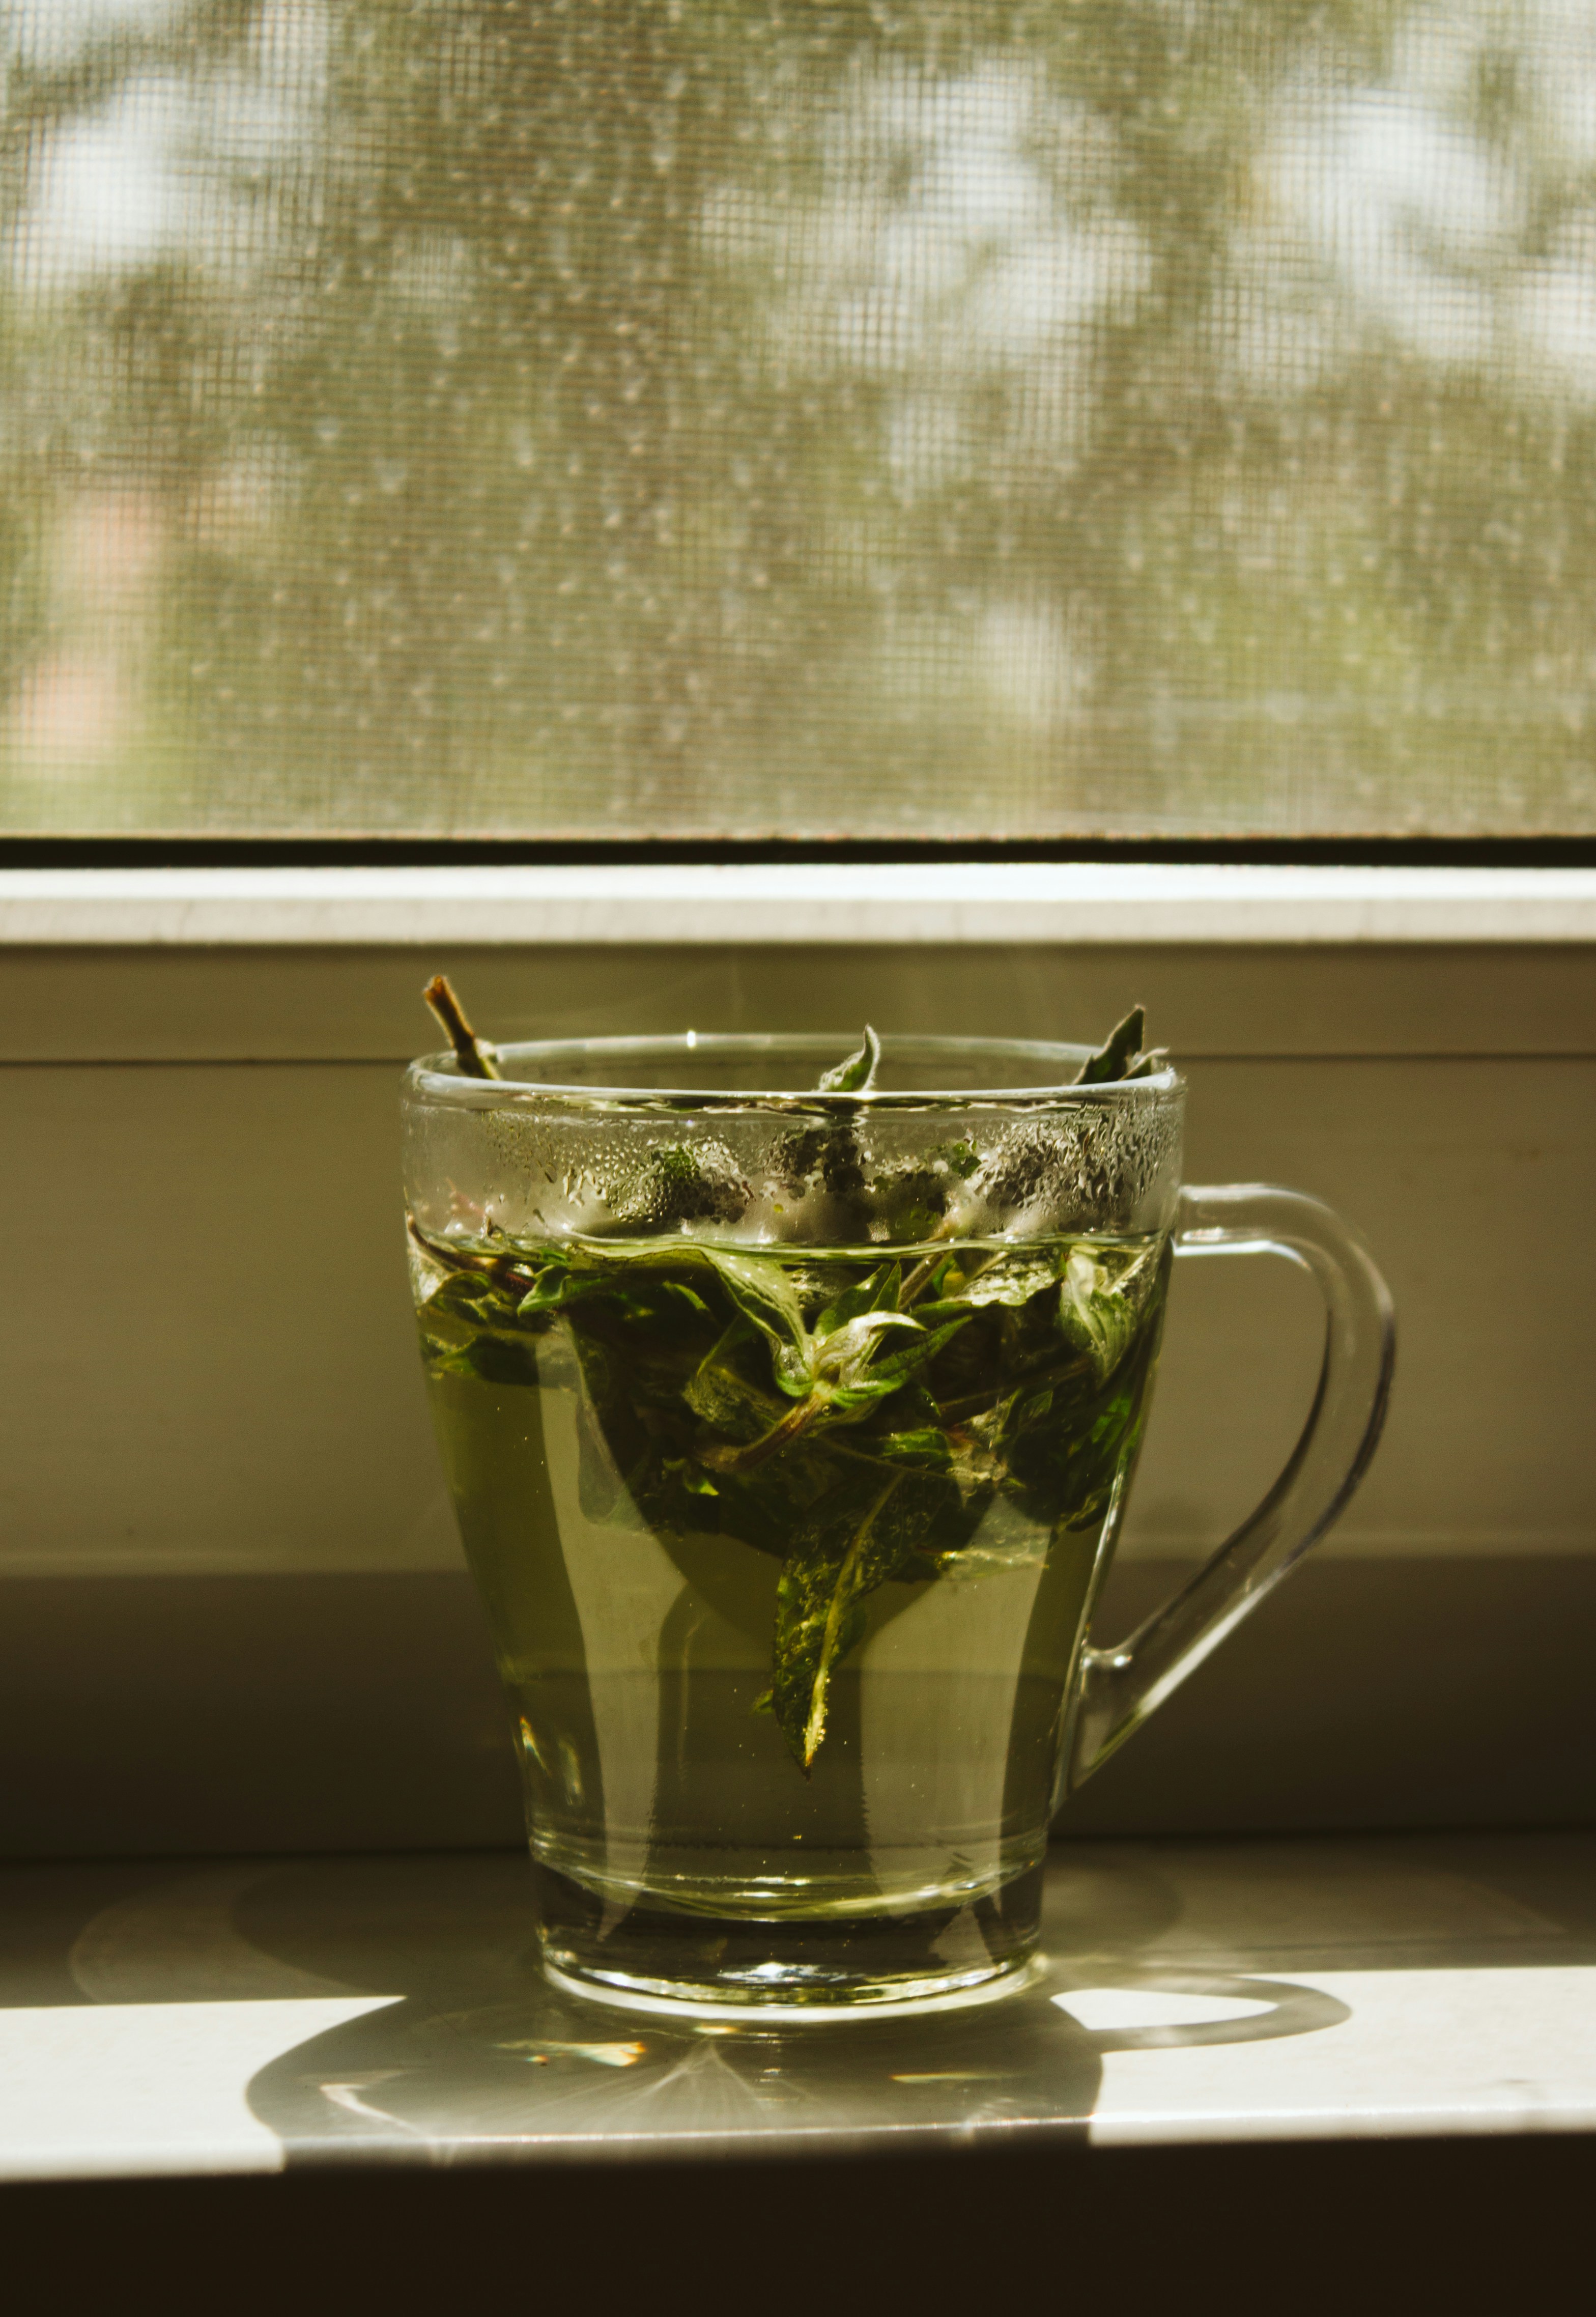 Can Green Tea Be Useful In Managing Symptoms Of Anxiety And Promoting Relaxation?